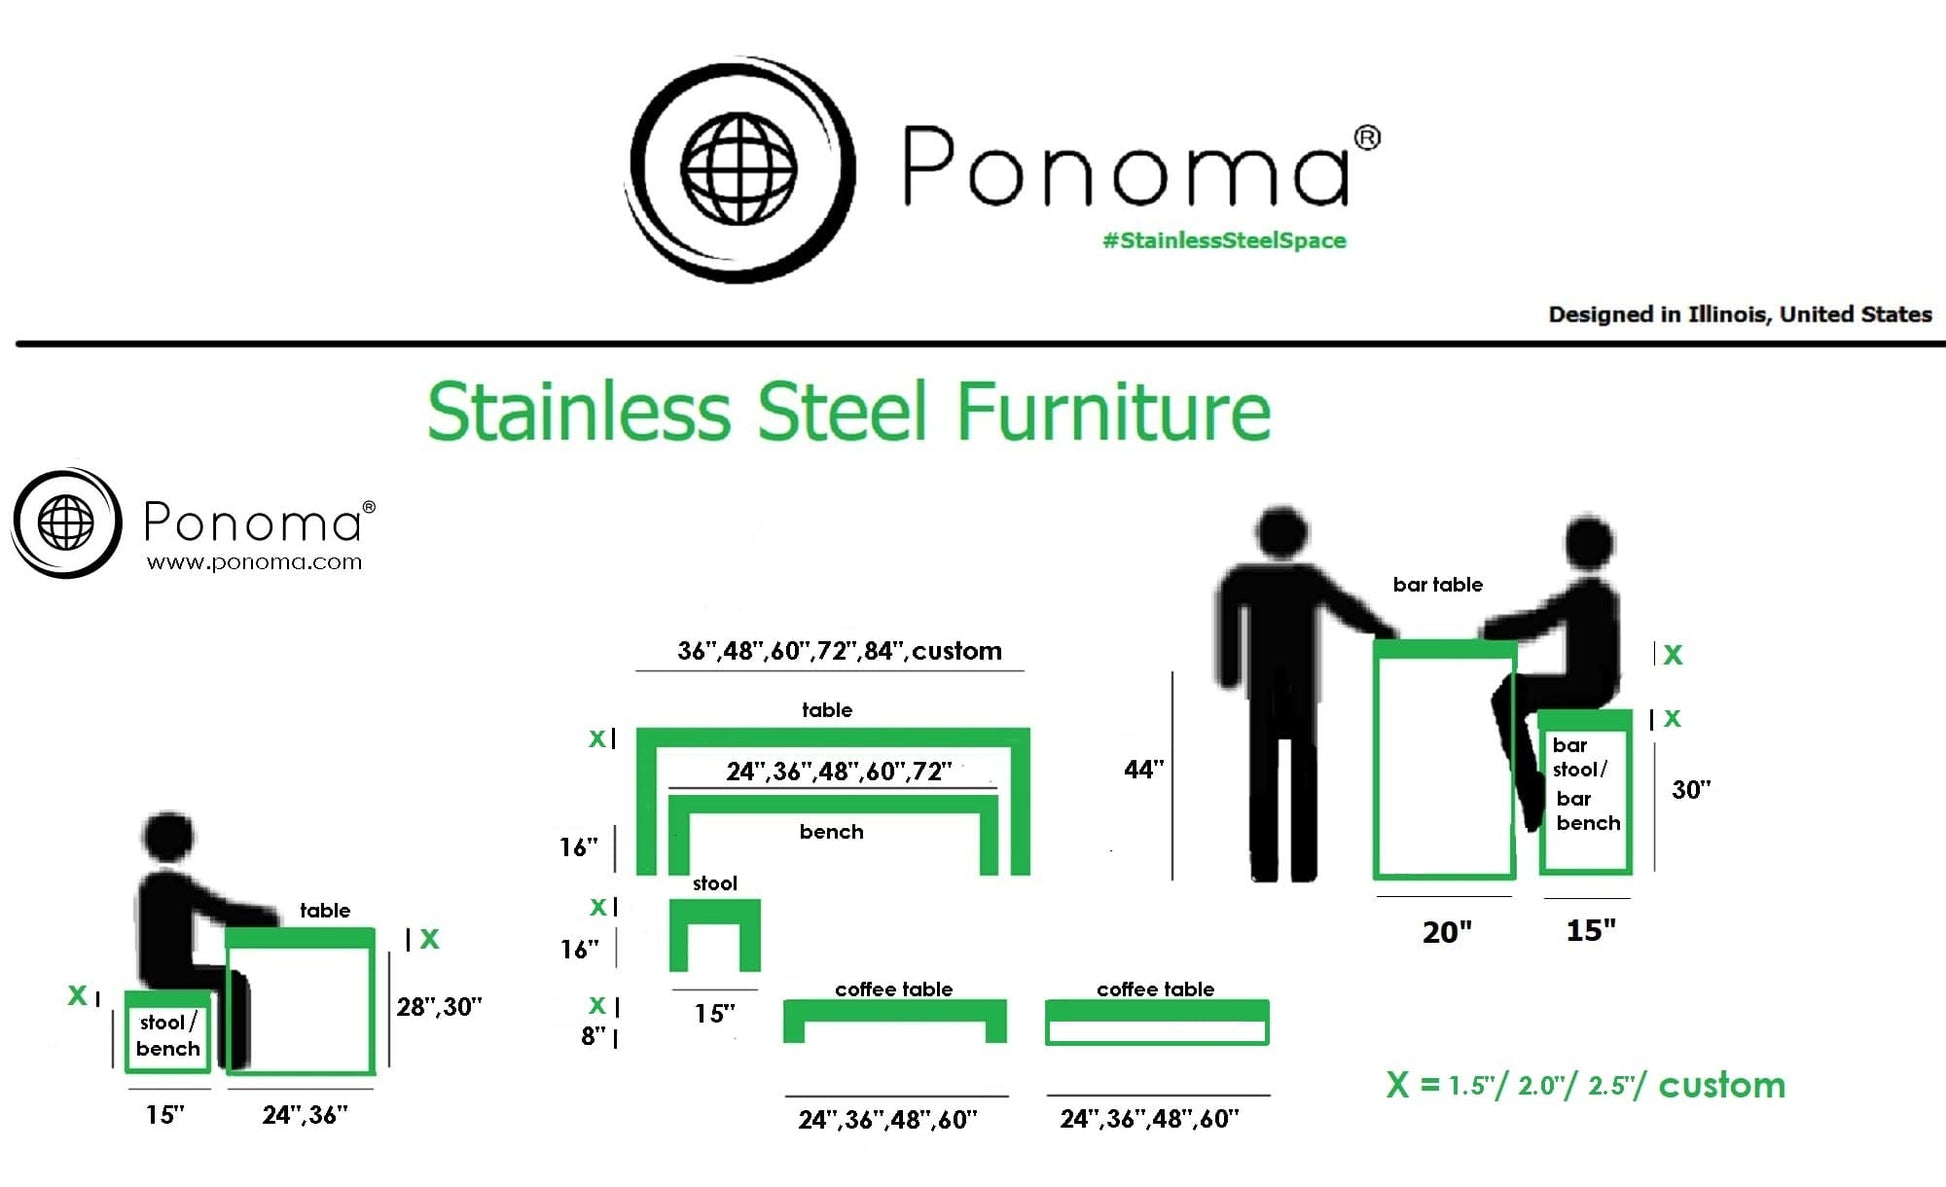 Stainless steel Furniture